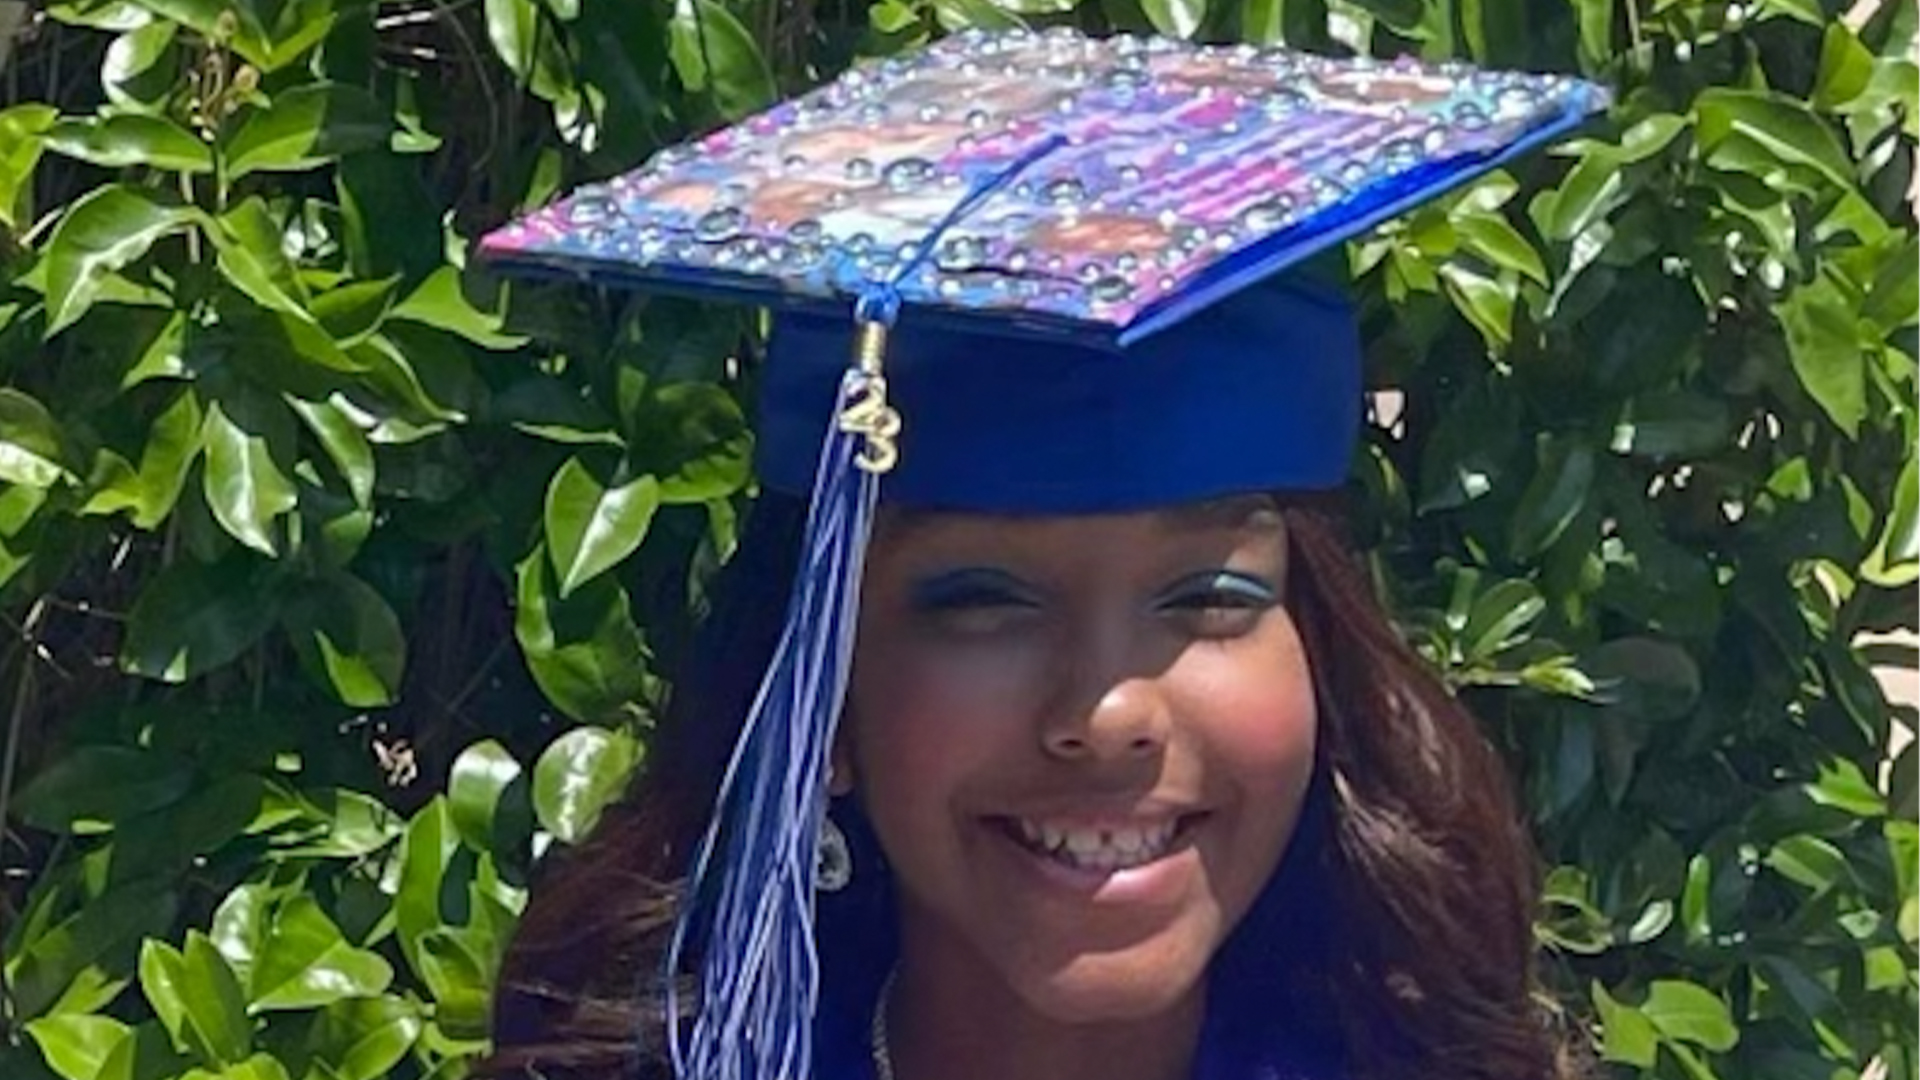 Zaalyiah Giddens Graduates High School At Age 15 And Heads To College With Aspirations Of Launching A Cybersecurity Business